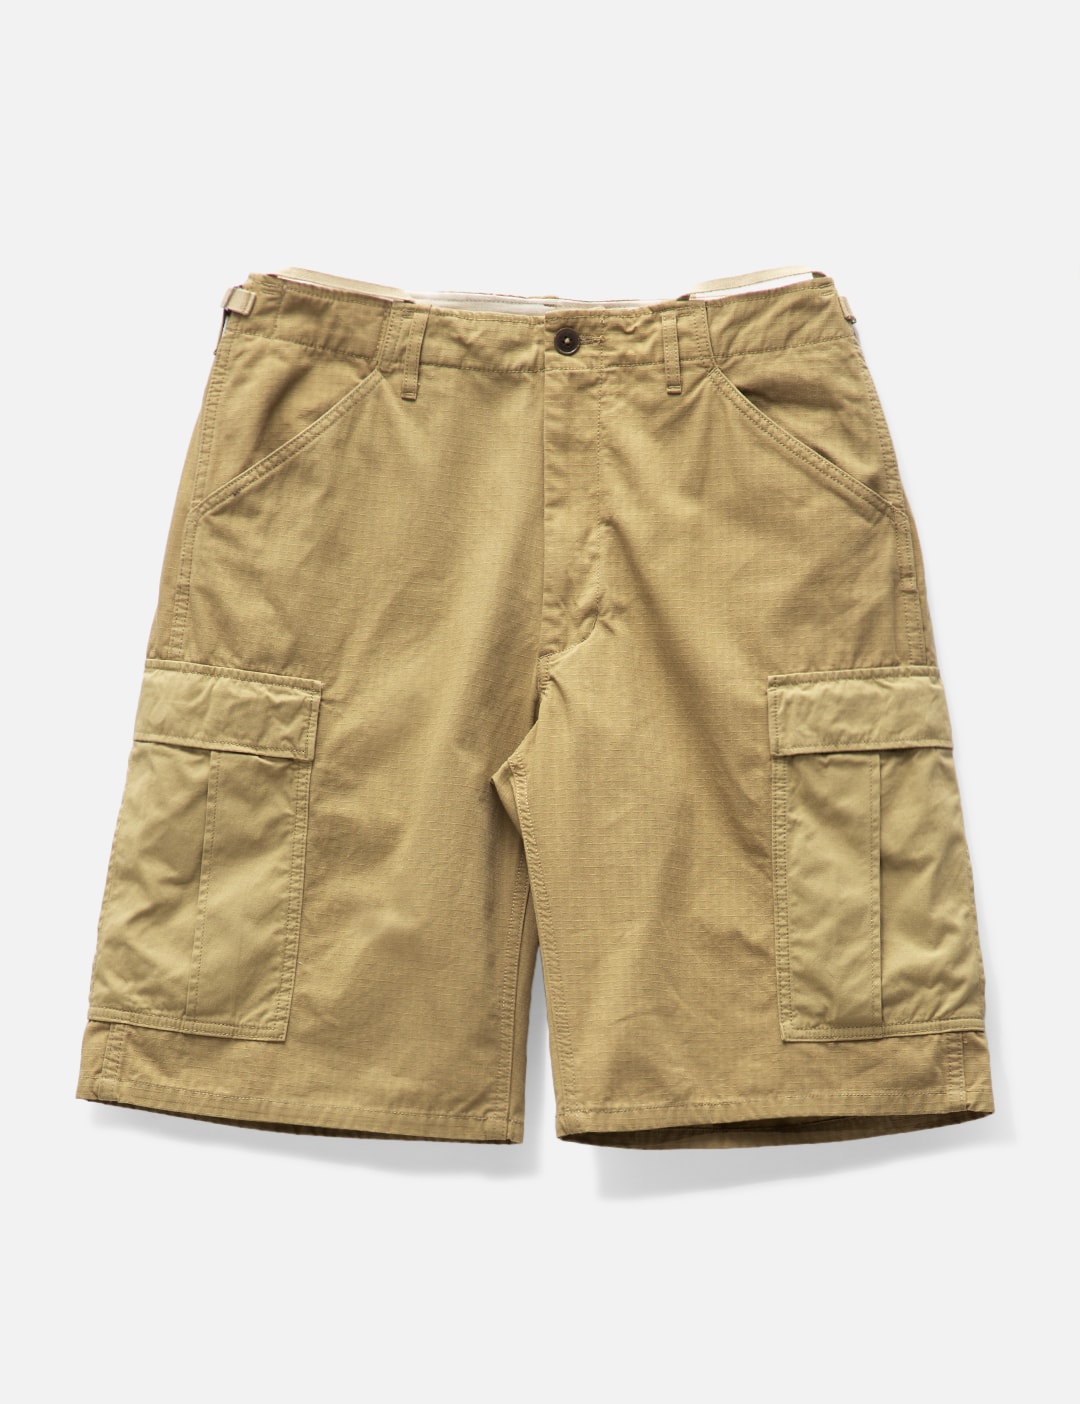 Nanamica - Cargo Shorts | HBX - Globally Curated Fashion and Lifestyle ...